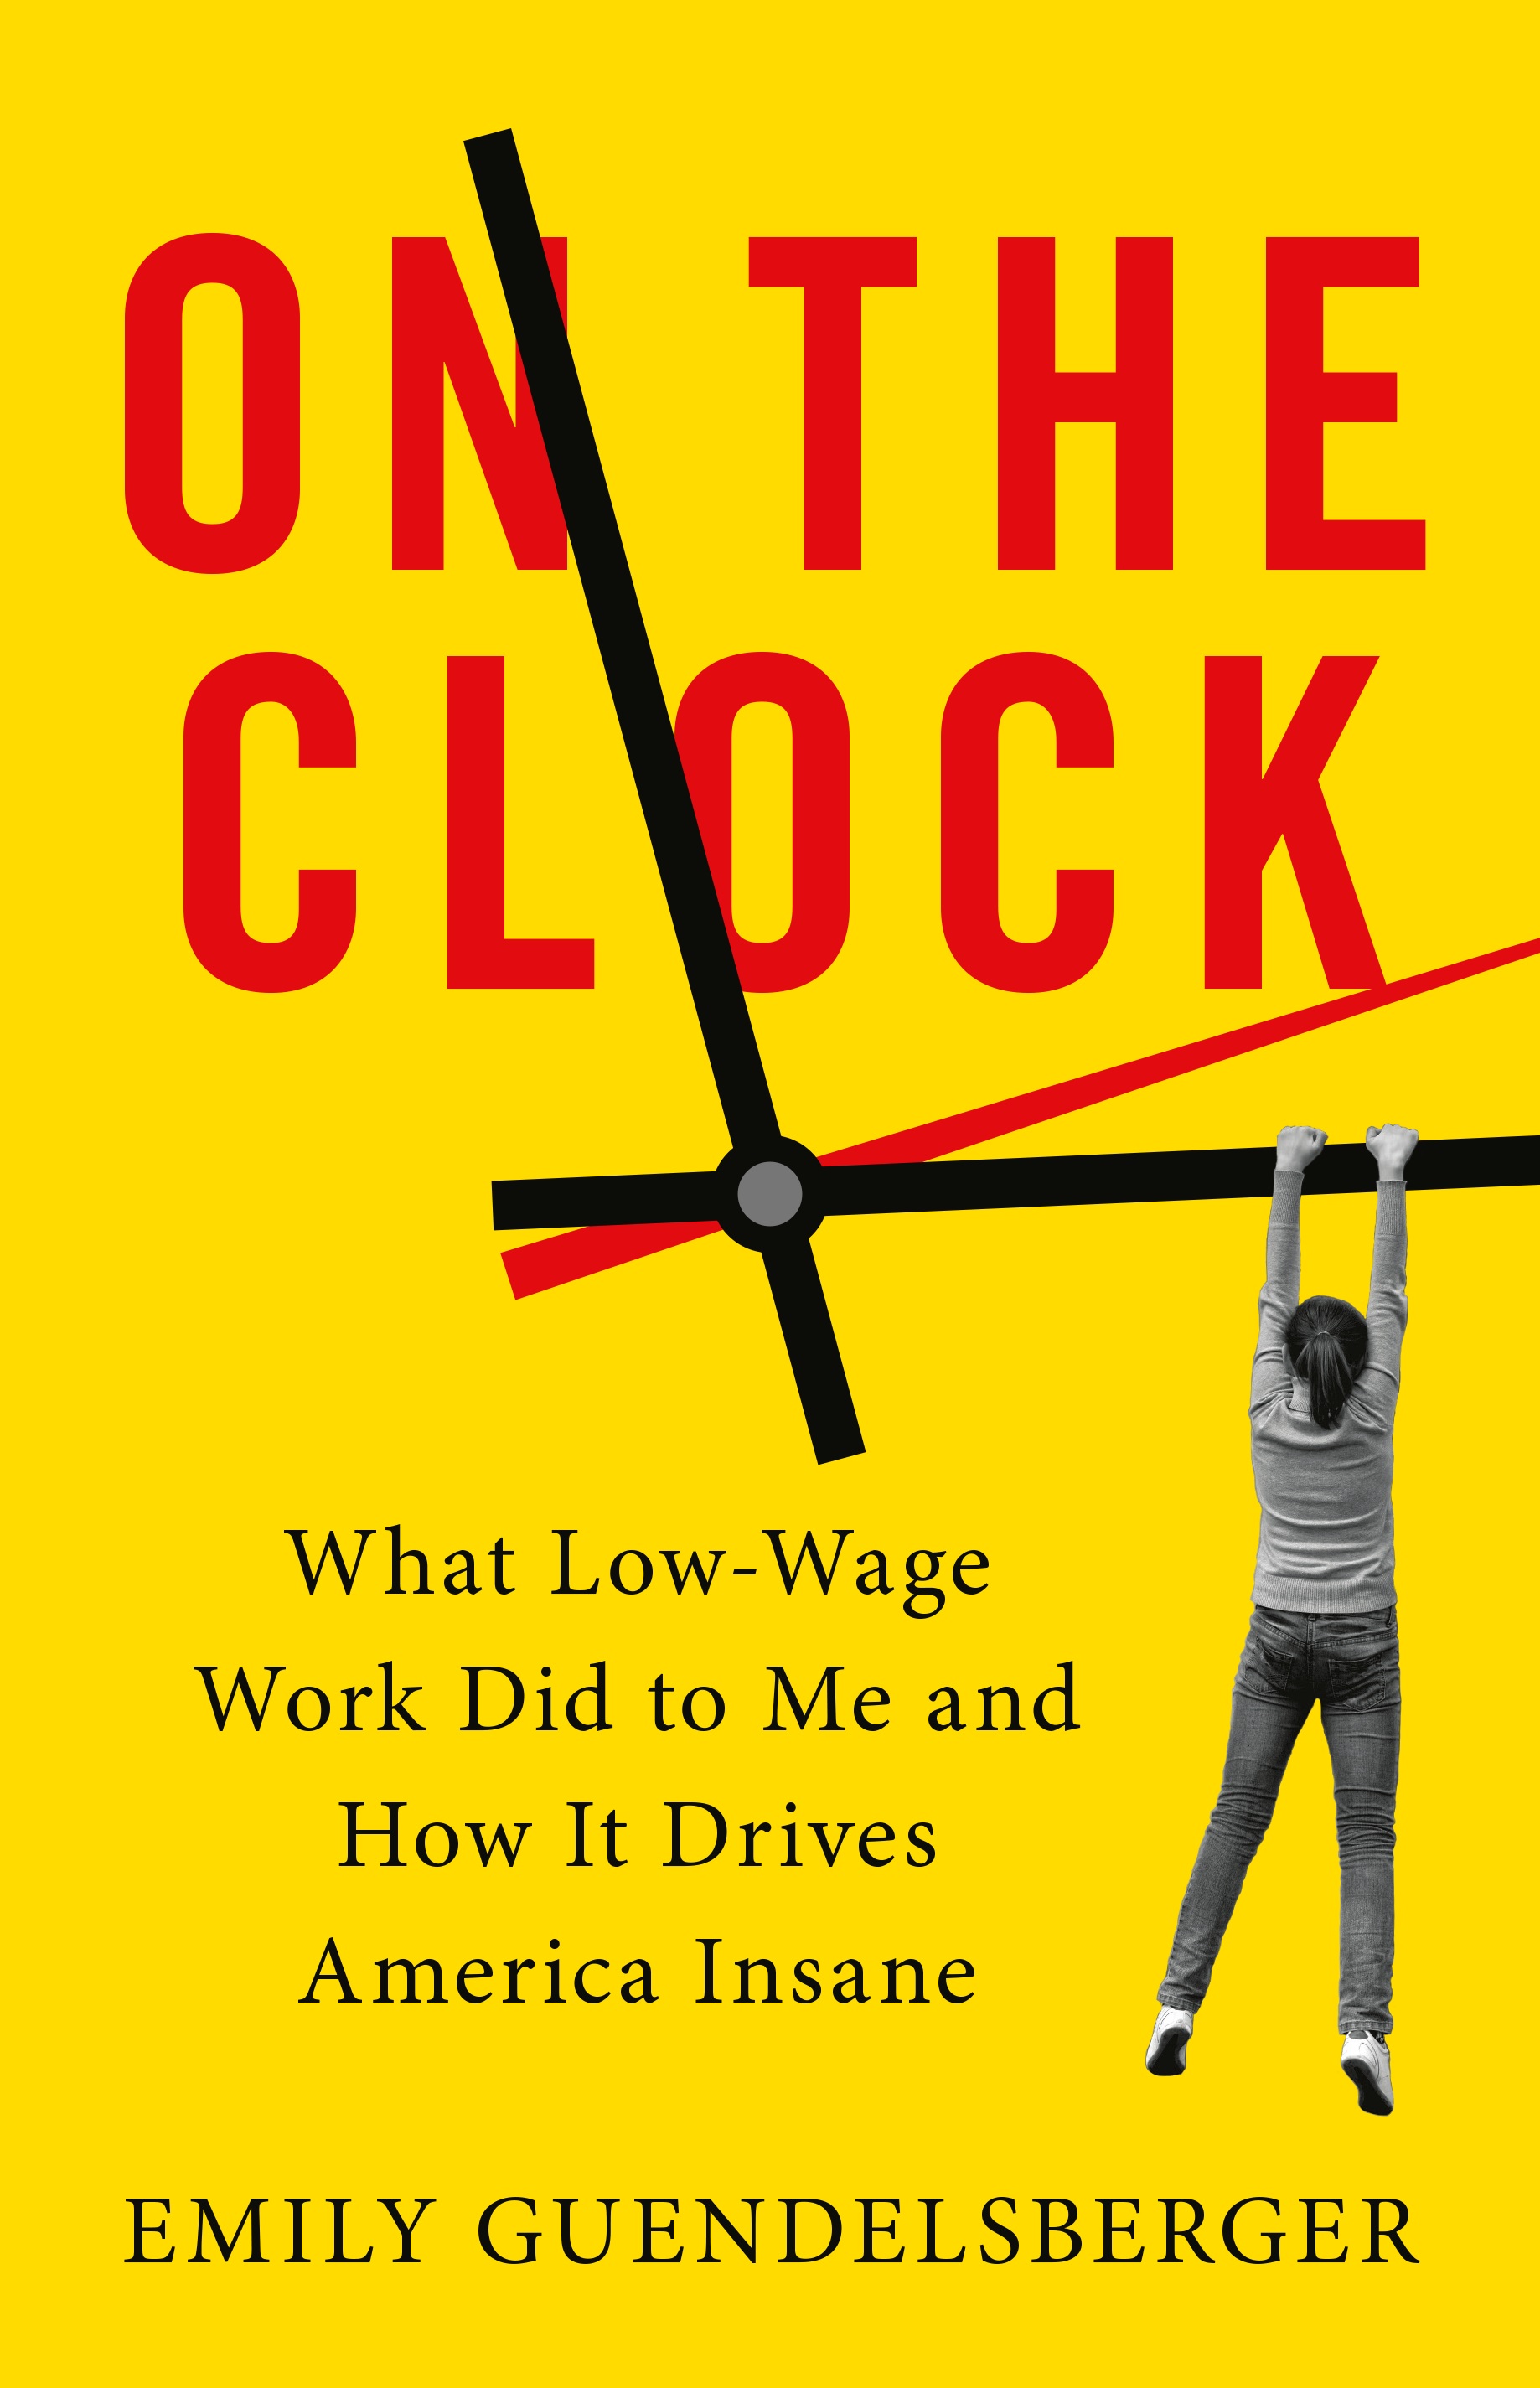 Book Launch: On The Clock by Emily Guendelsberger in conversation with Jessica Bruder